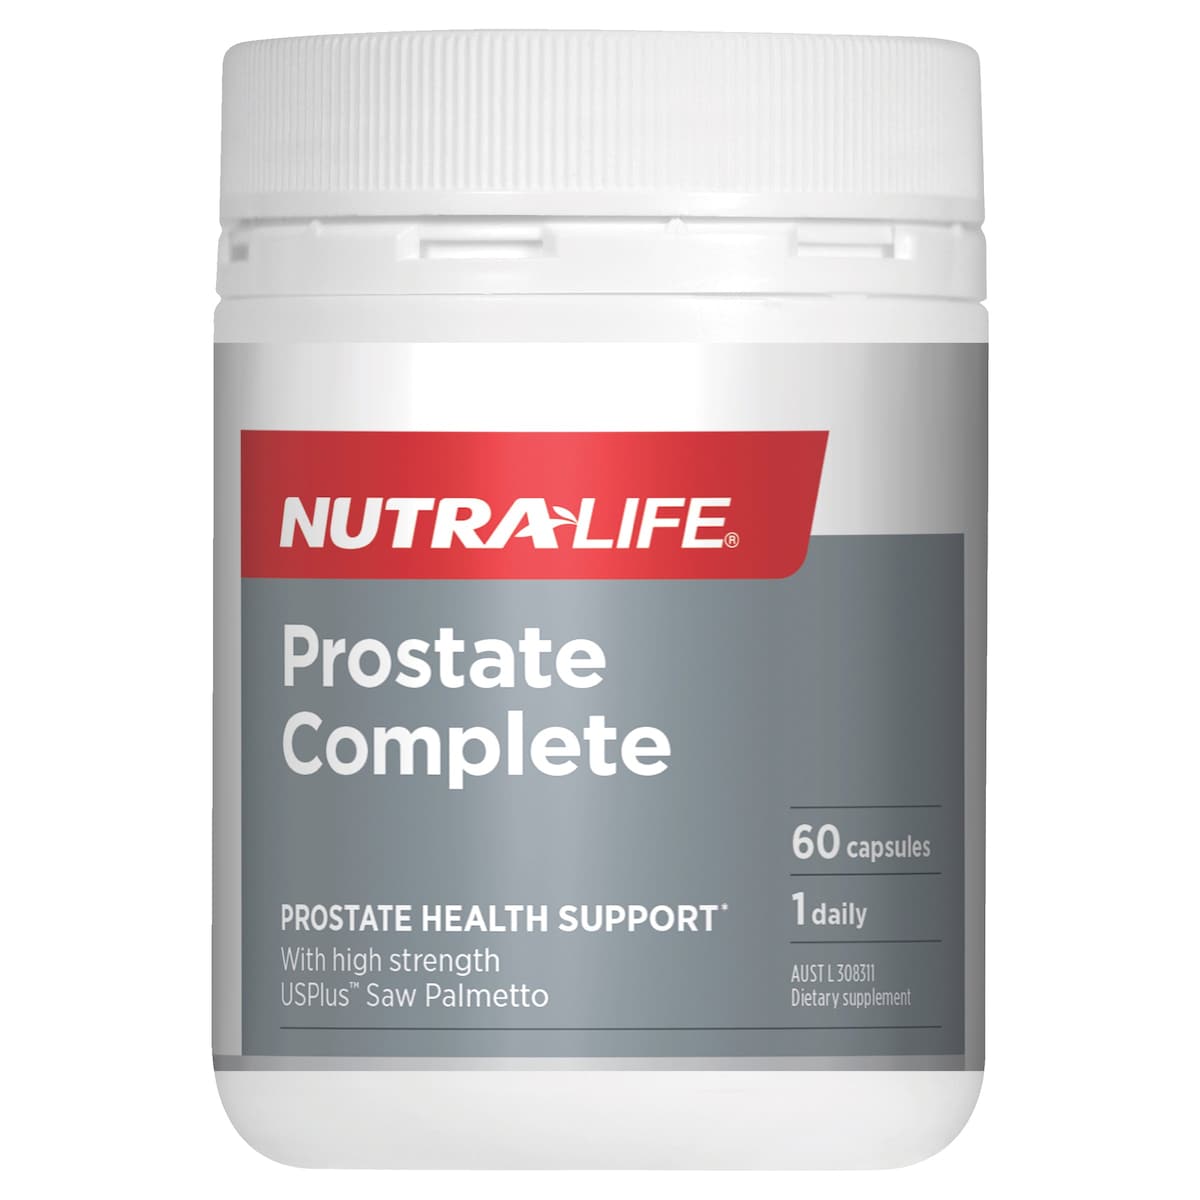 Nutra-Life Prostate Complete 100 Capsules